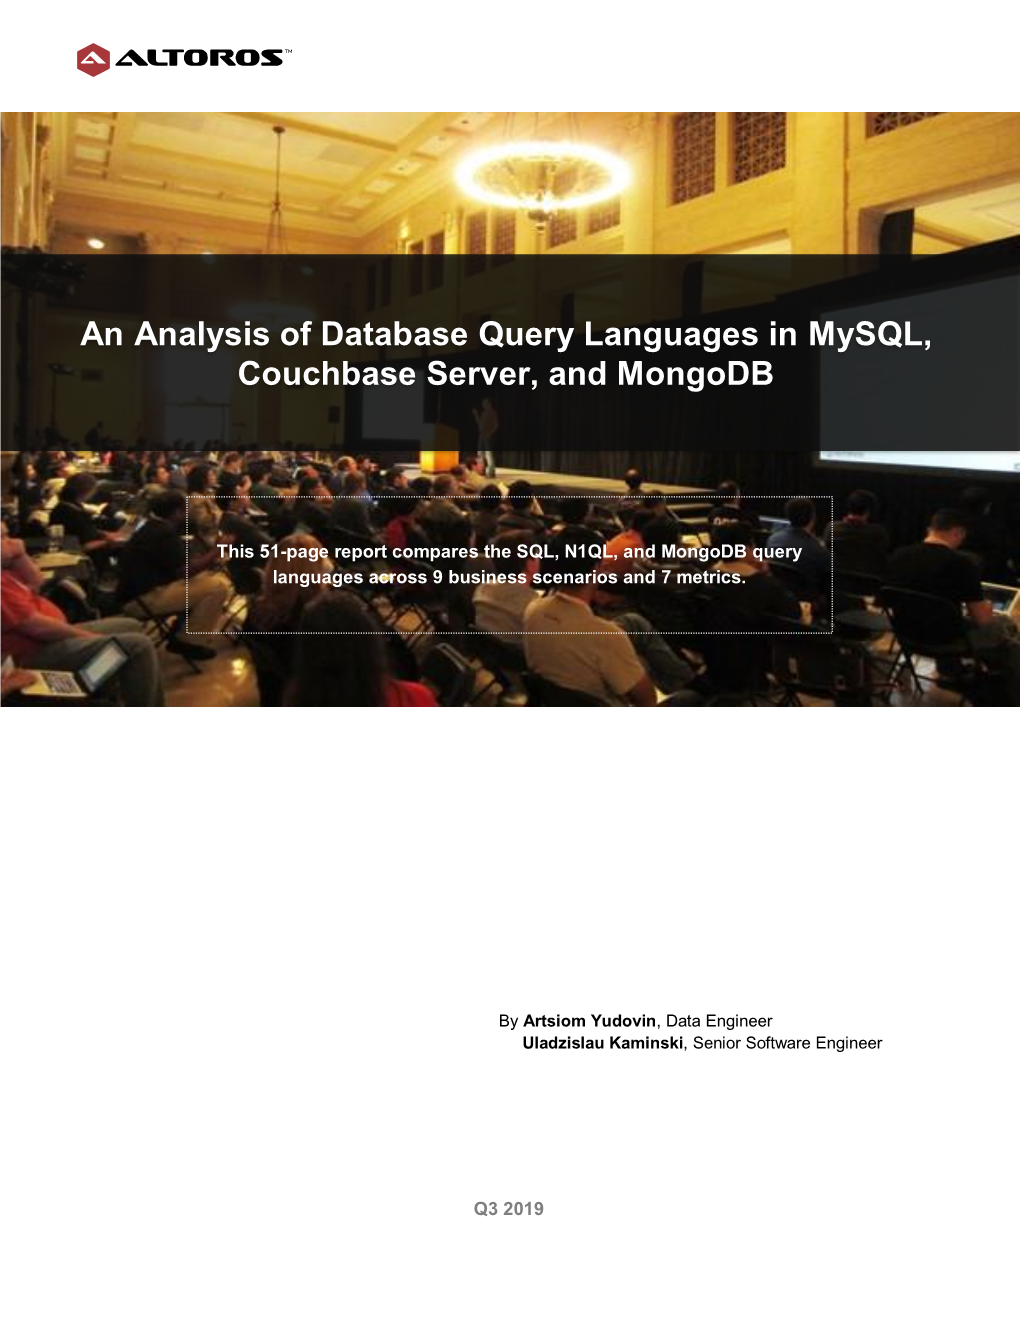 An Analysis of Database Query Languages in Mysql, Couchbase Server, and Mongodb